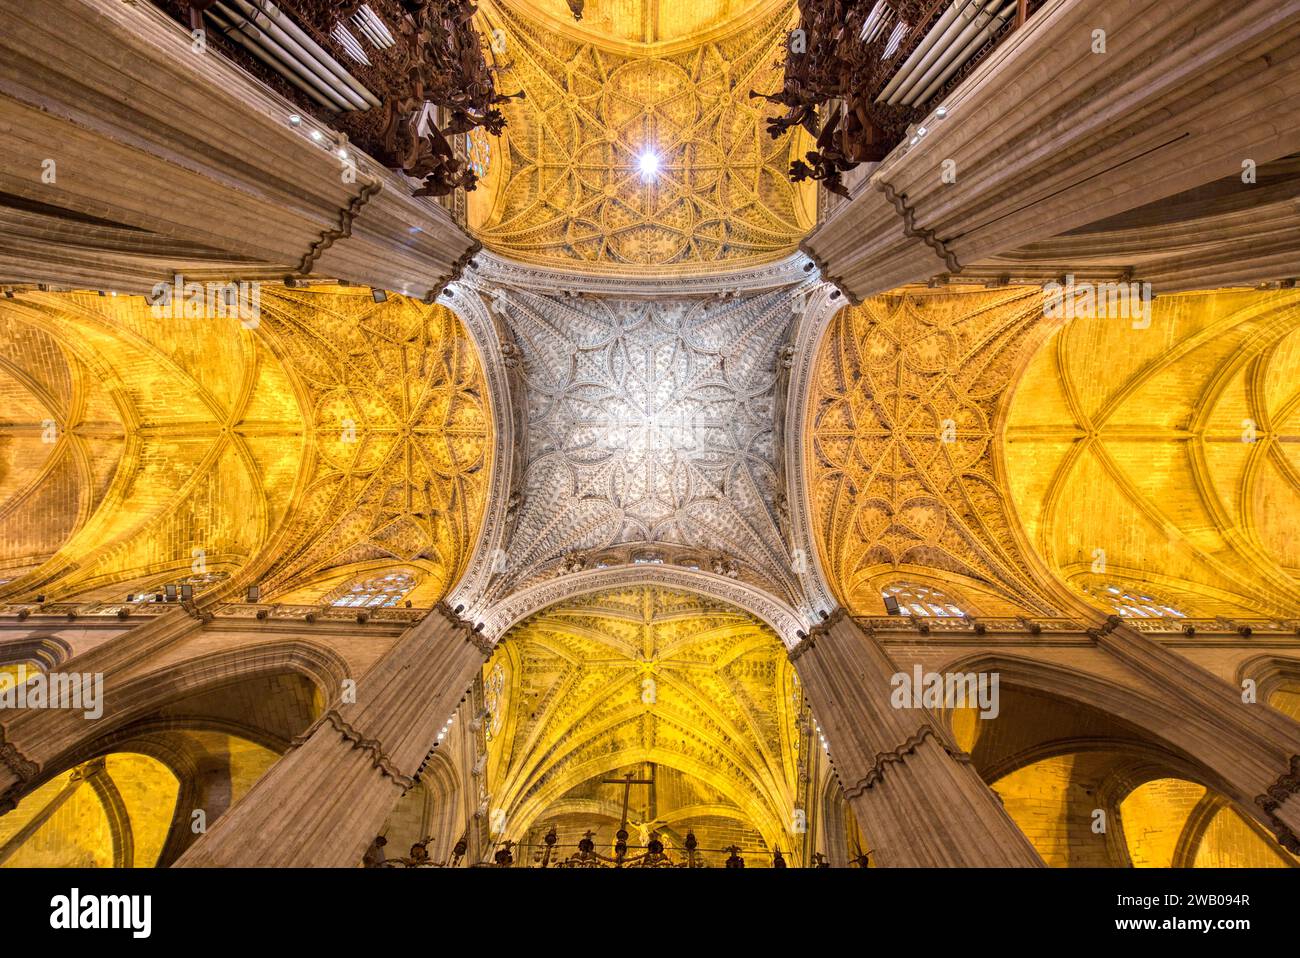 The ornate ceiling and arches of the Cathedral of Sevilla.  The 15th century cathedral is a UNESCO World Heritage Stock Photo